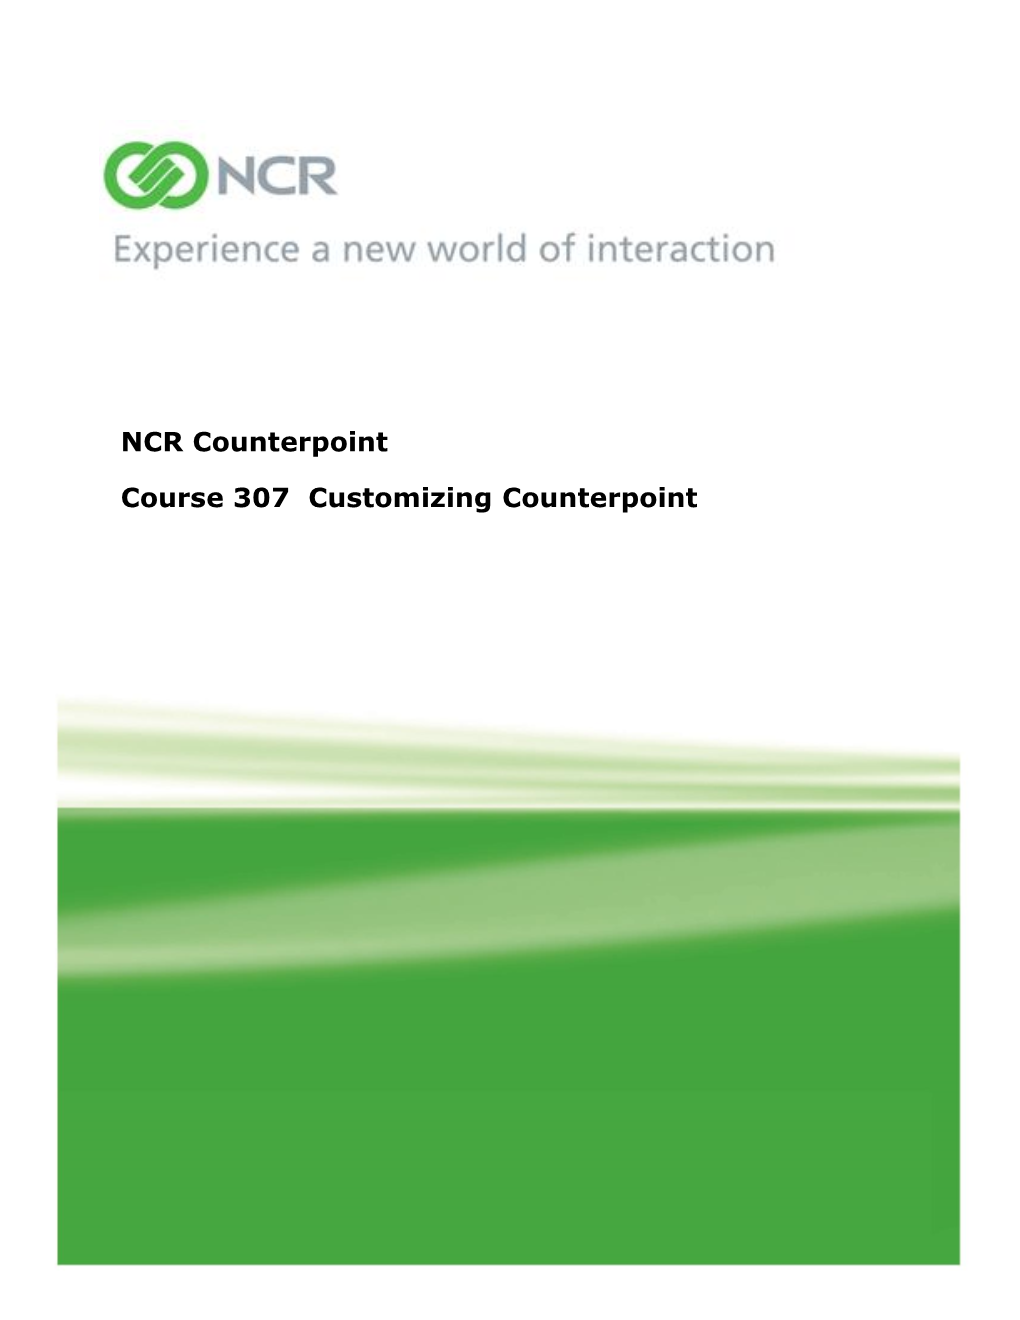 NCR Counterpoint Course 307 Customizing Counterpoint